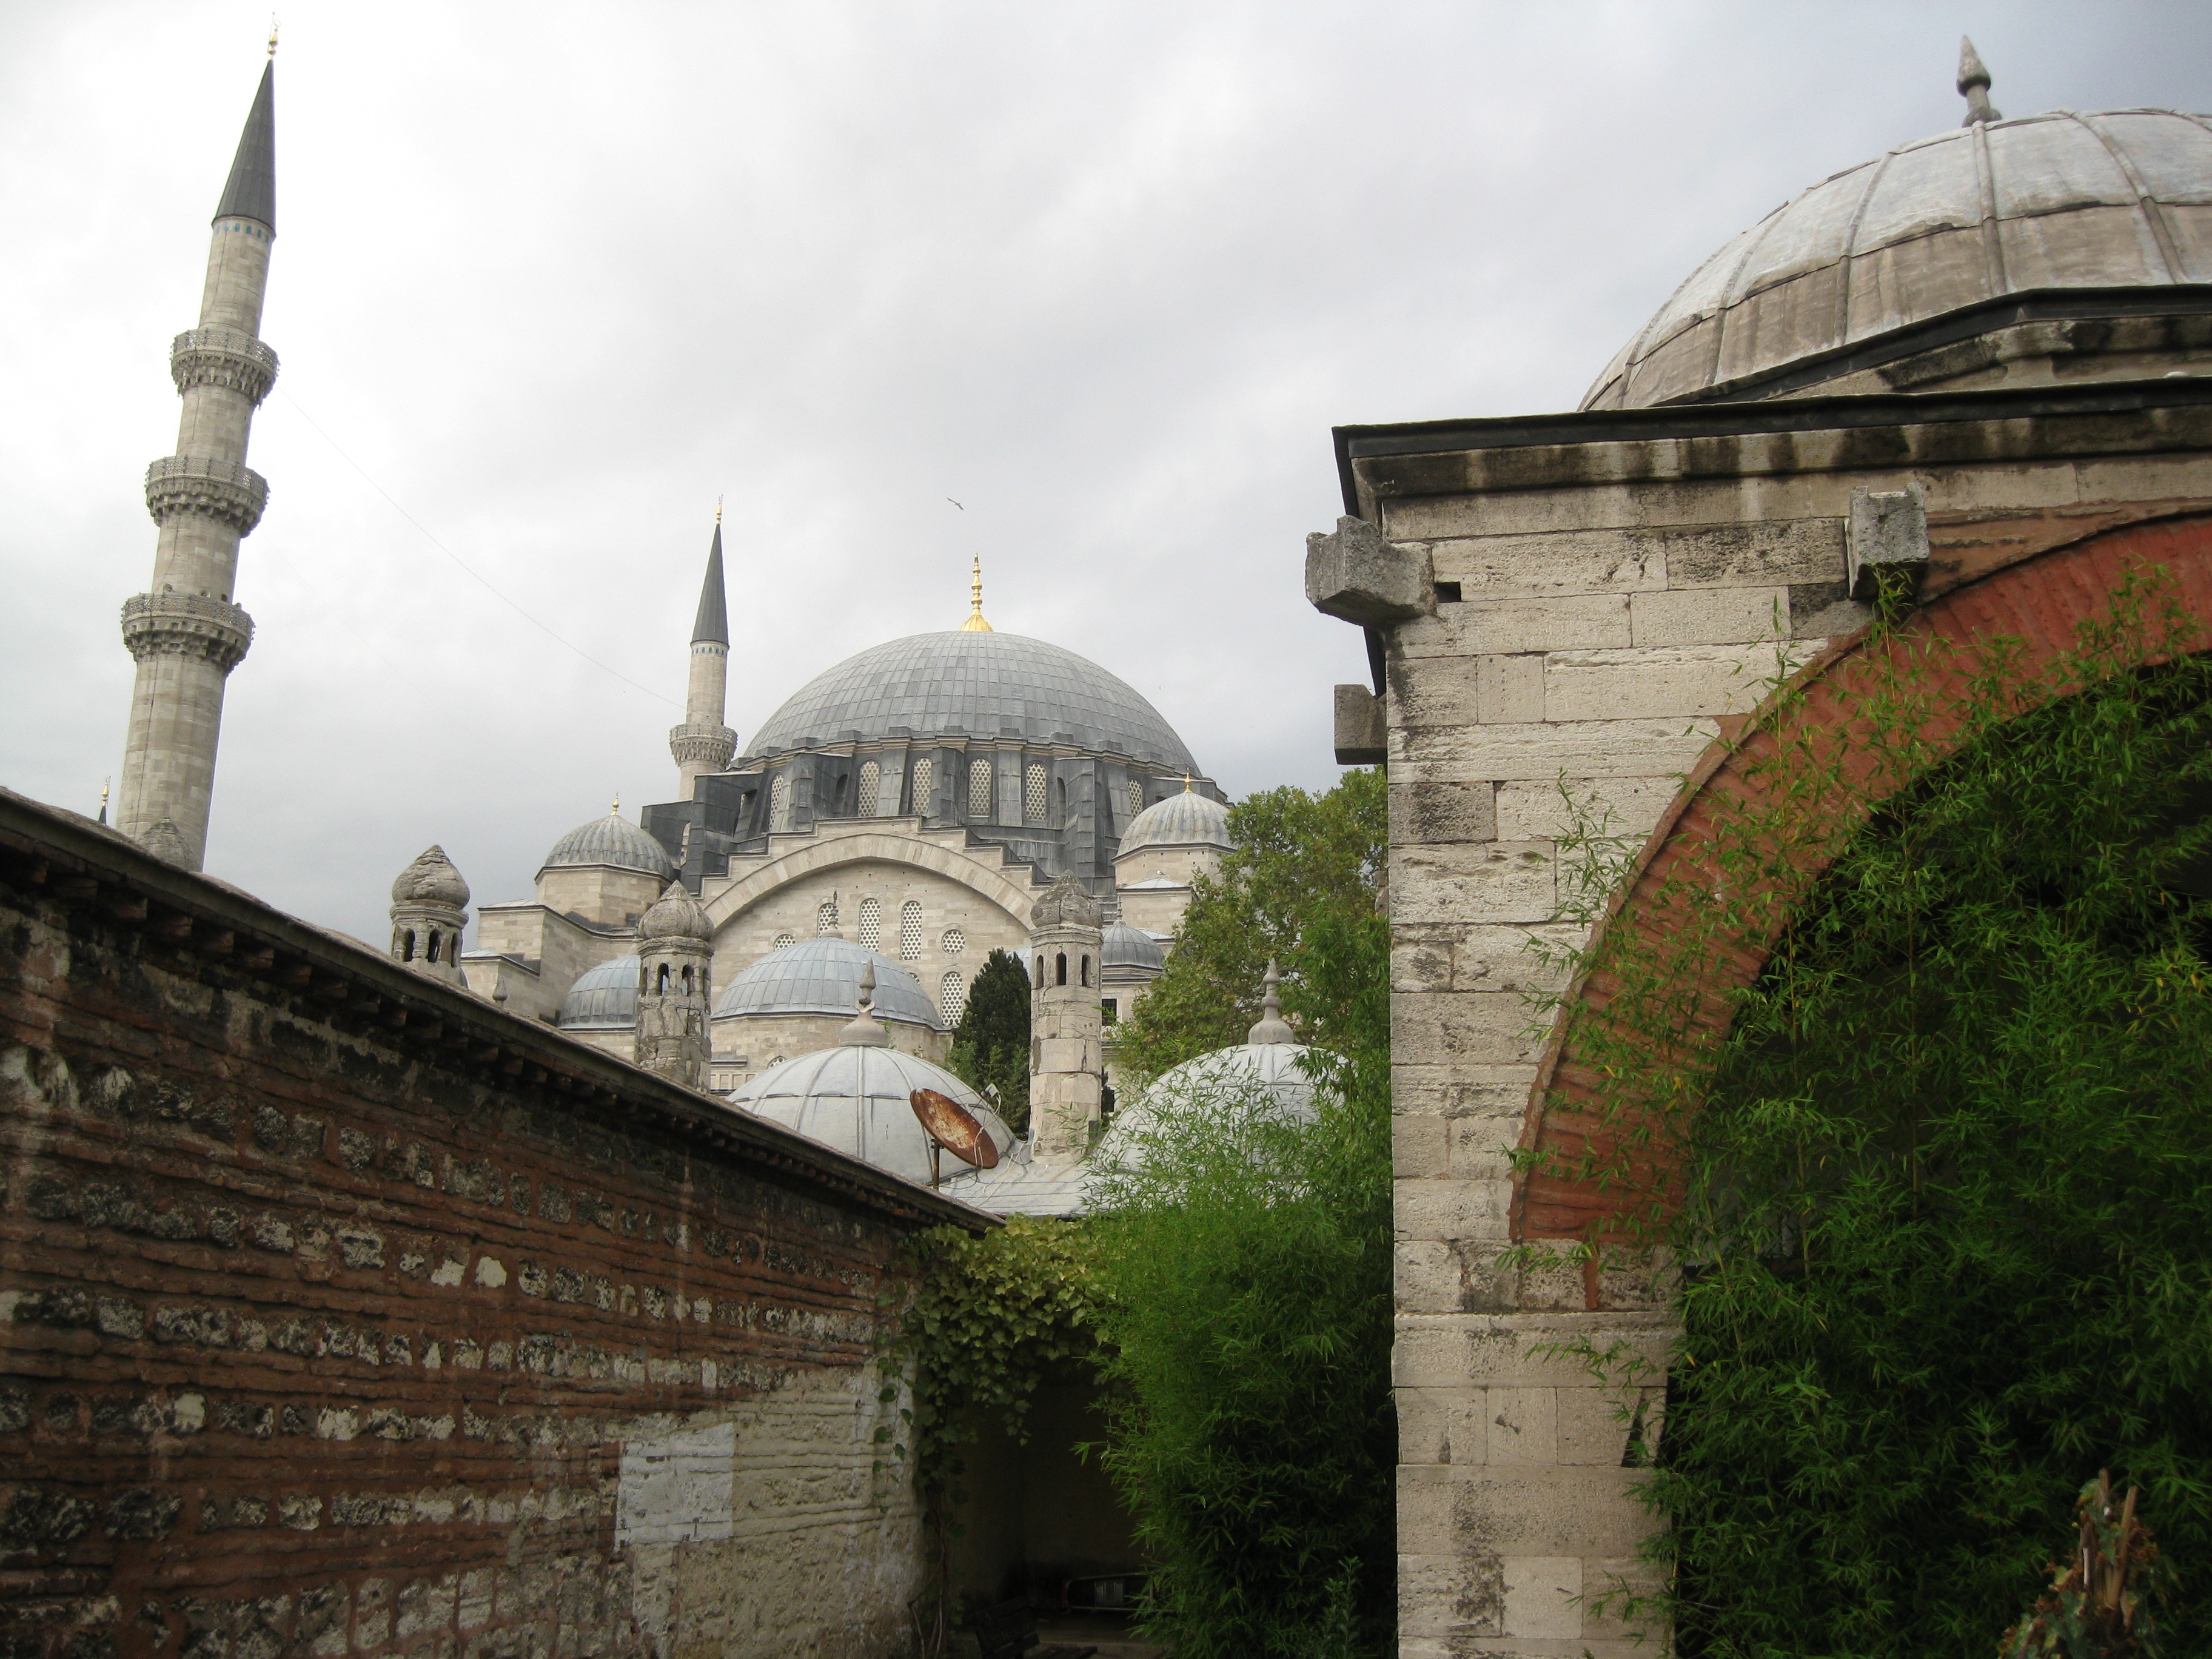 A view of Süleymaniye Camii from the courtyard of the reading room.